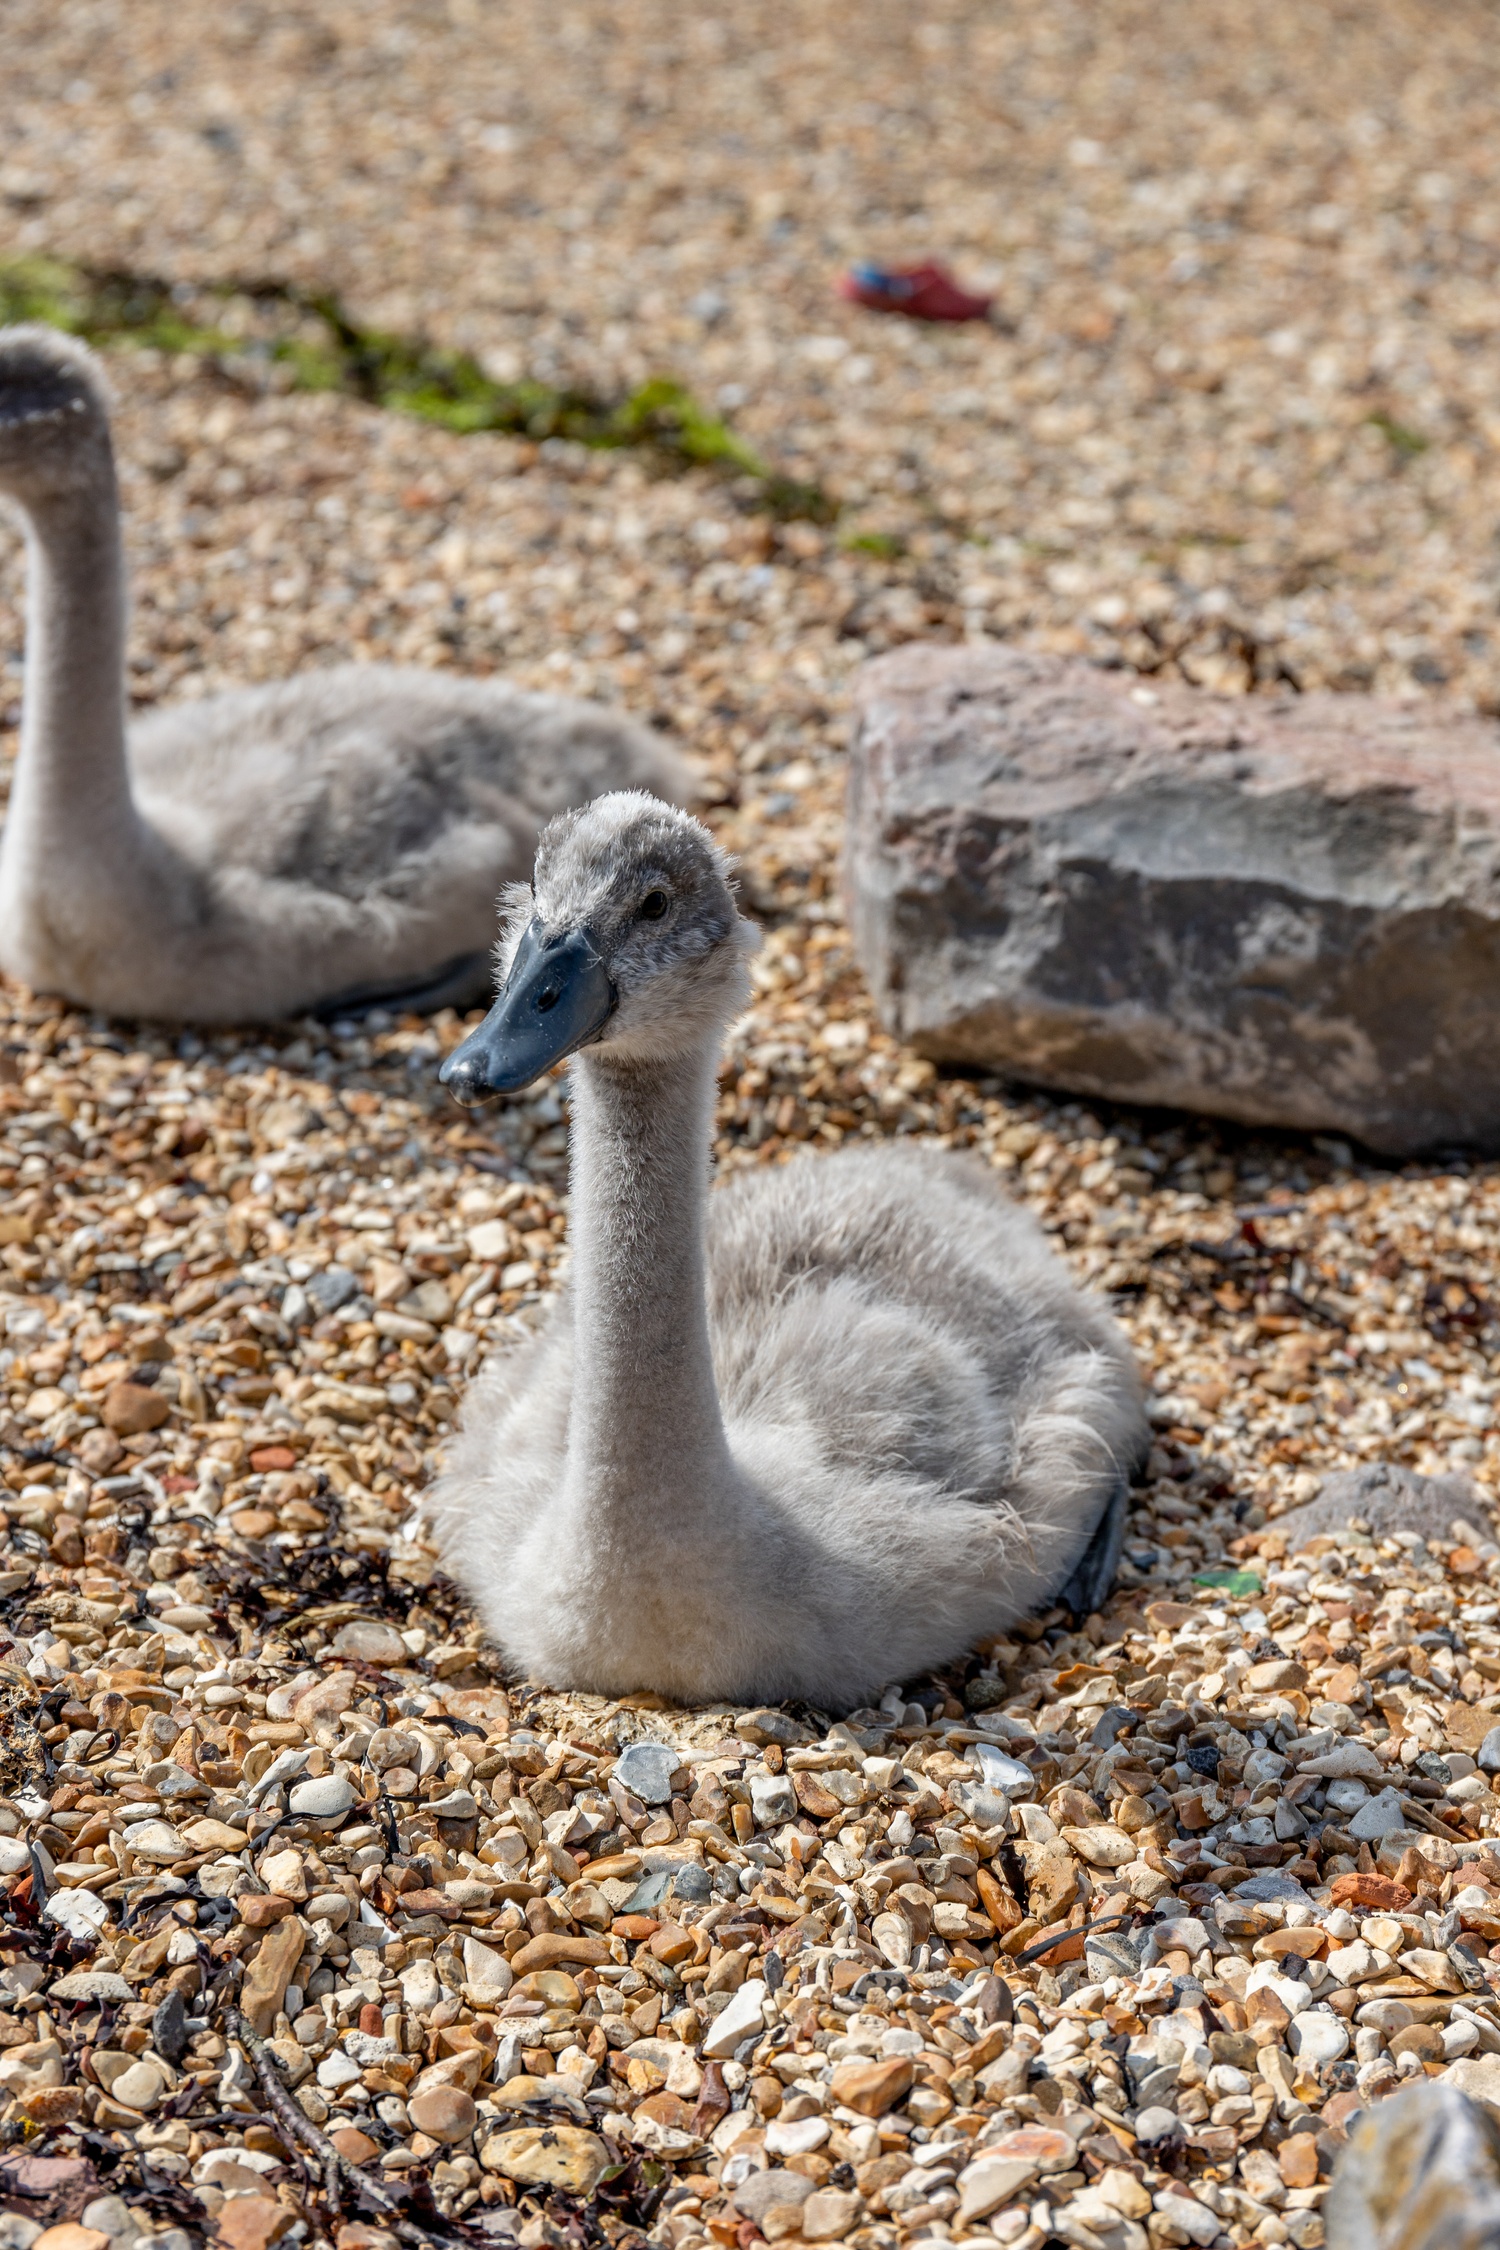 A cygnet sat on rocky beach looking to bottom left of frame